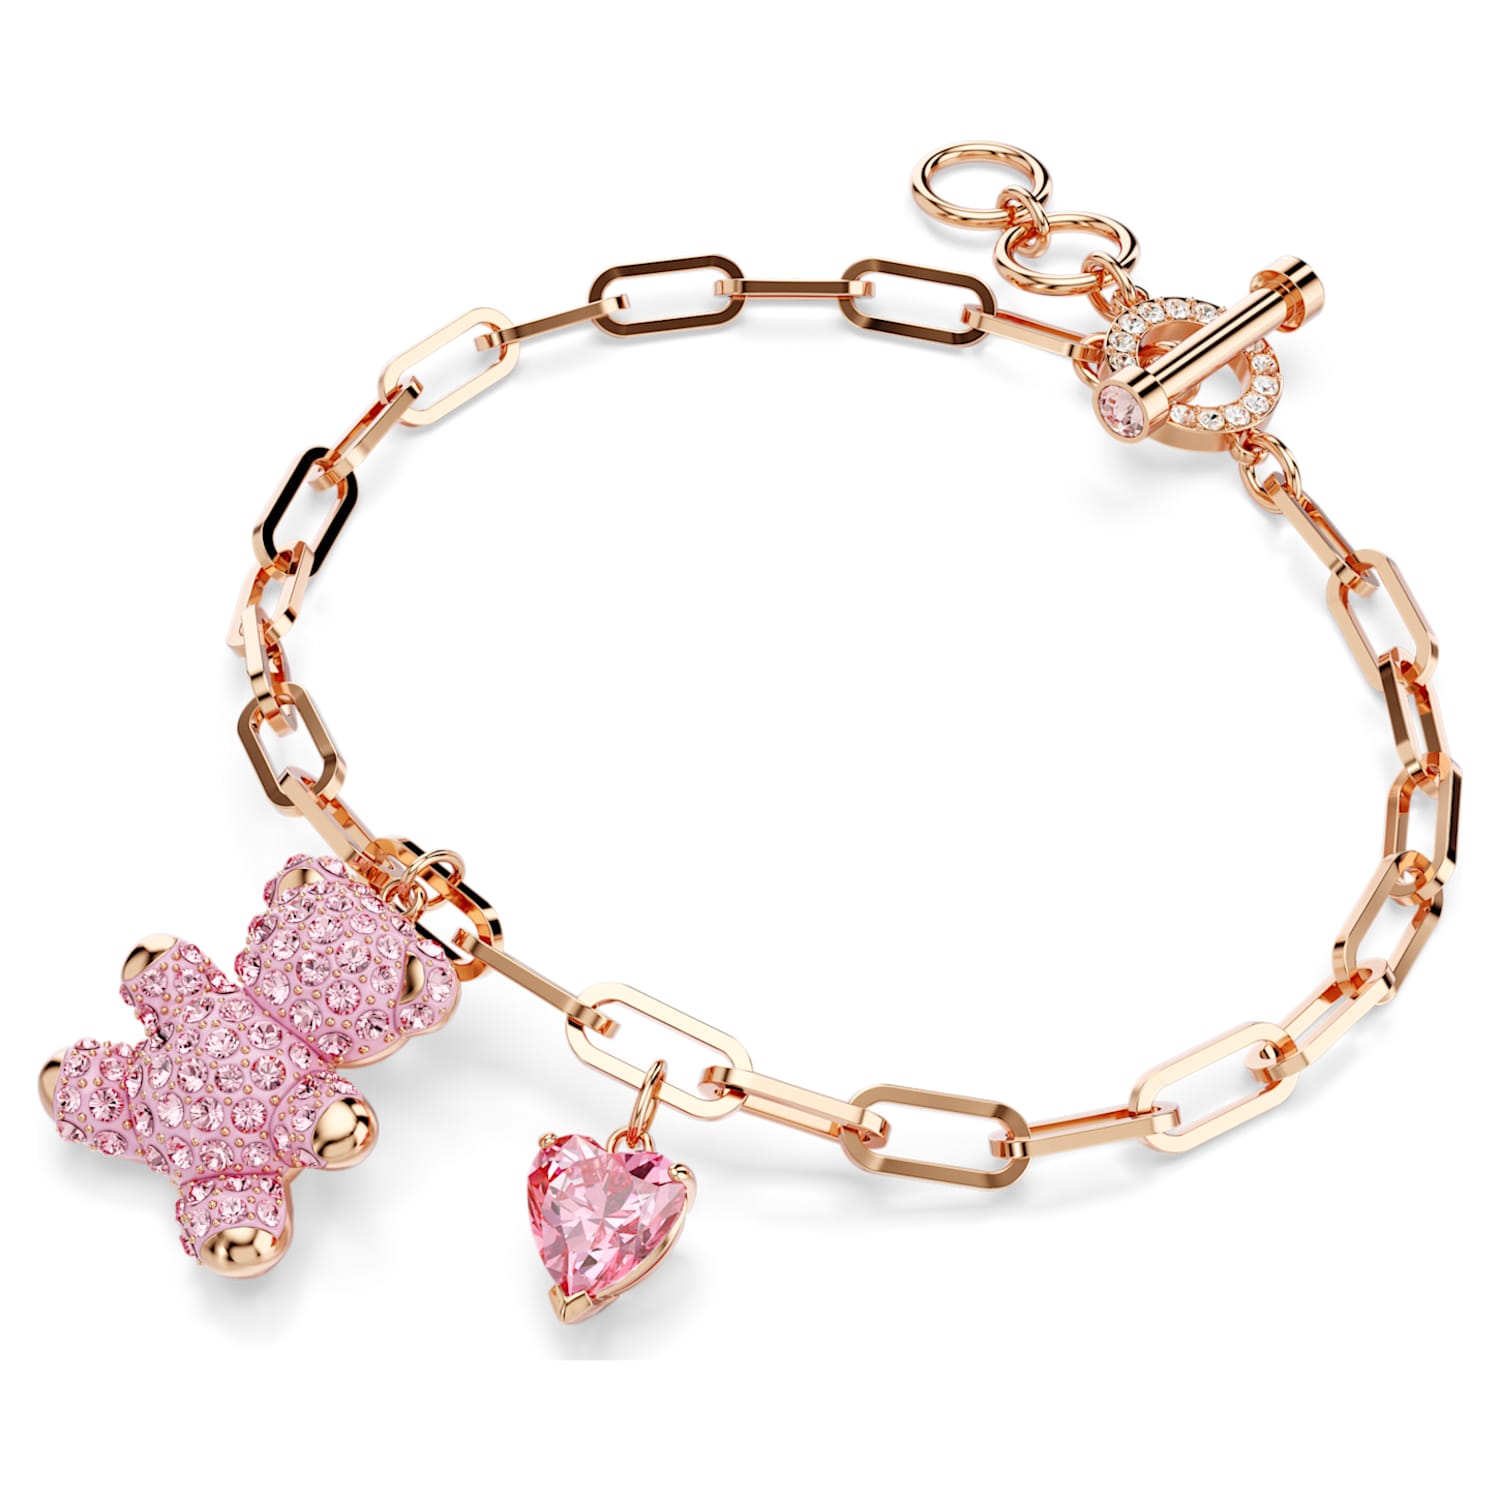 Okos Rose Gold Plated Pink Flowers Link Chain Adjustable Size Charm Alloy  Bracelet Decorated With Crystals for Girls  Women BROK1000009  Amazonin  Fashion